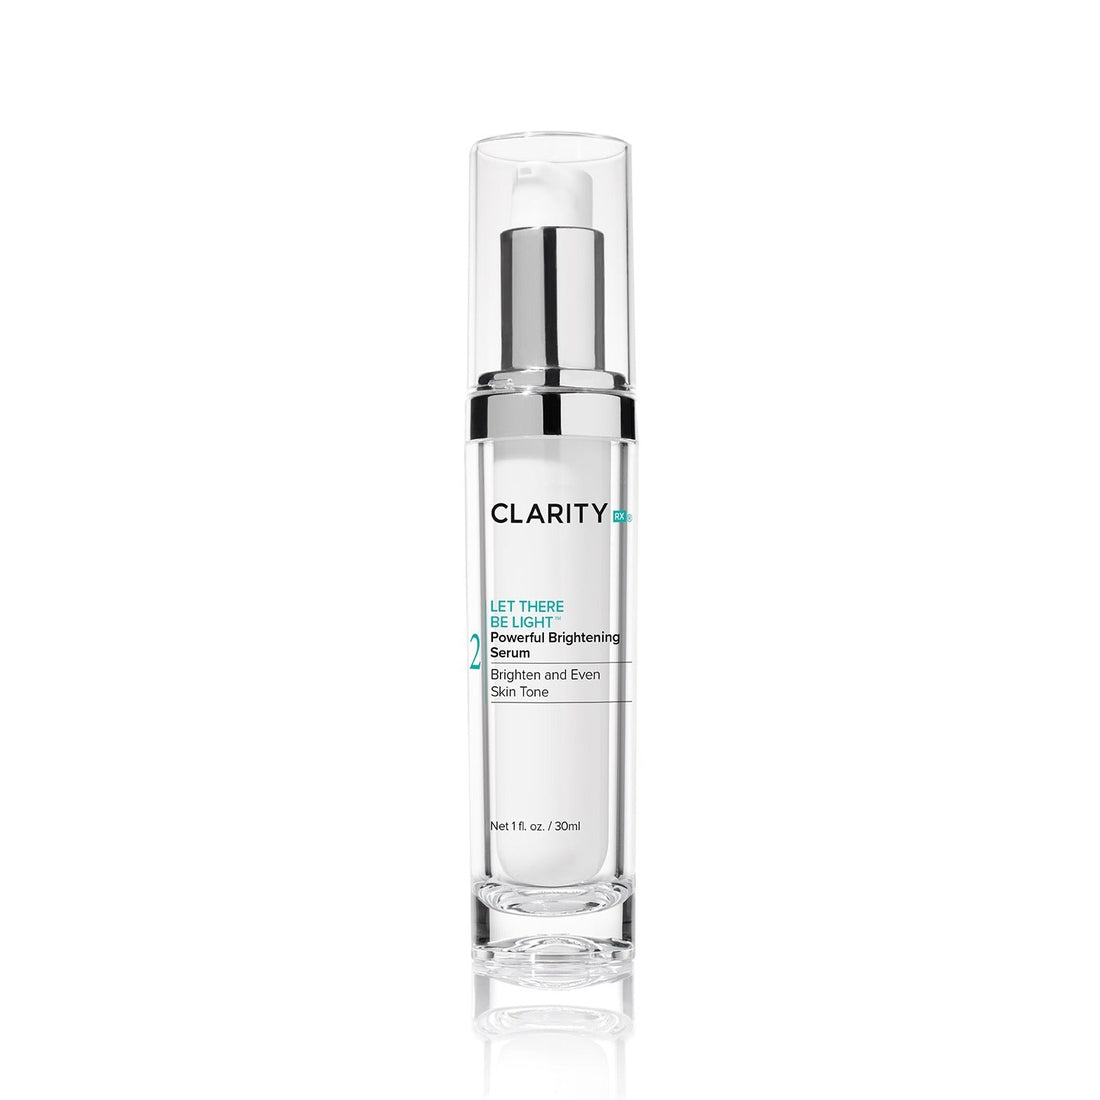 ClarityRx Let There Be Light Powerful Lightening Serum ClarityRx 1.0 fl. oz. Shop Skin Type Solutions